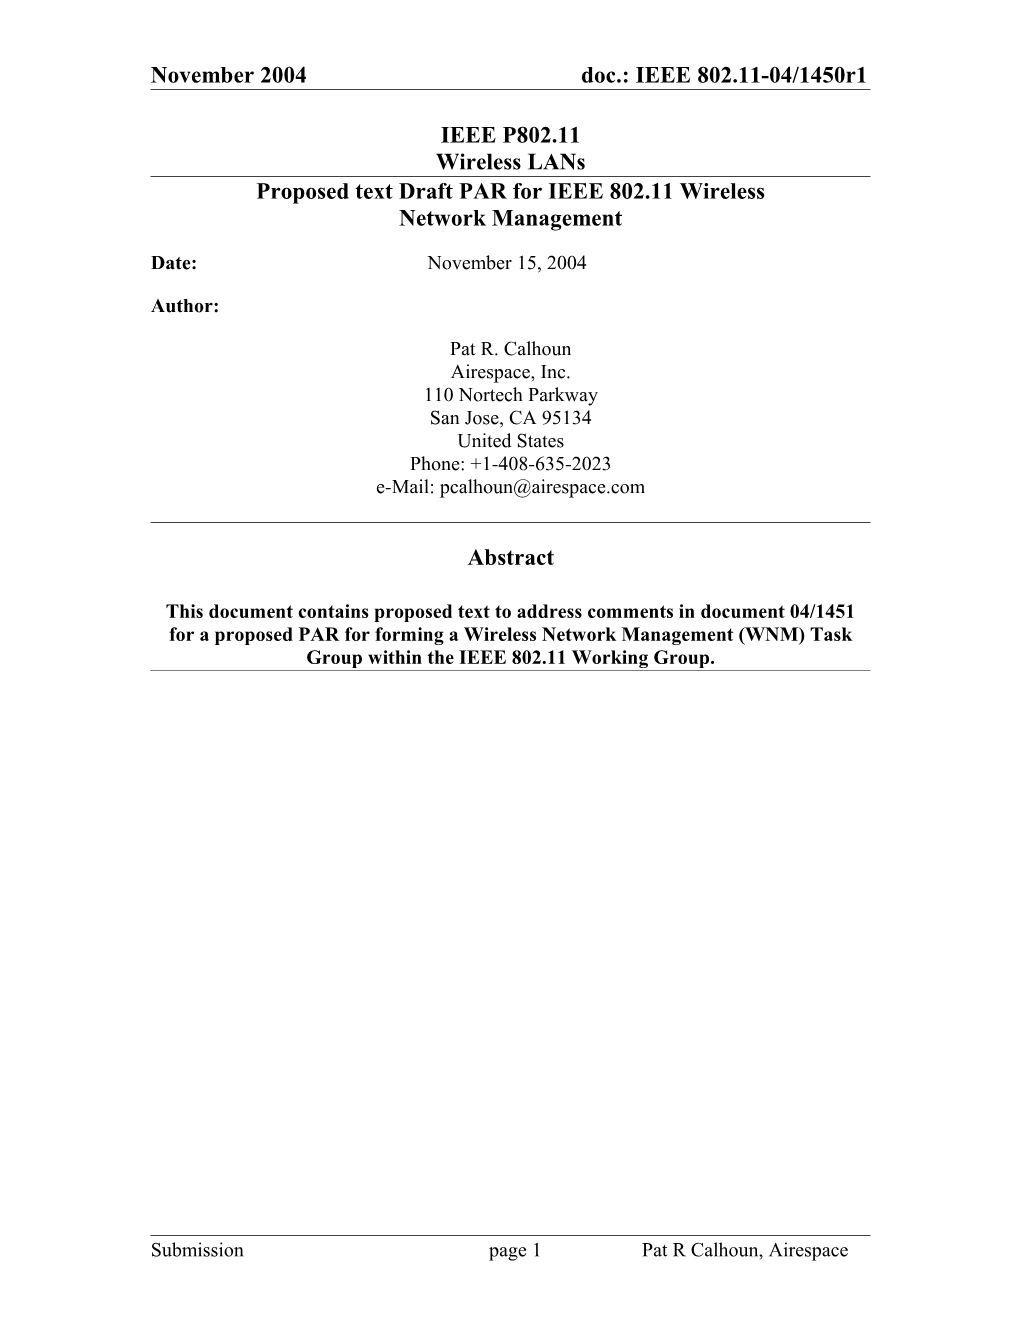 Proposed Text Draft PAR for IEEE 802.11 Wireless Network Management